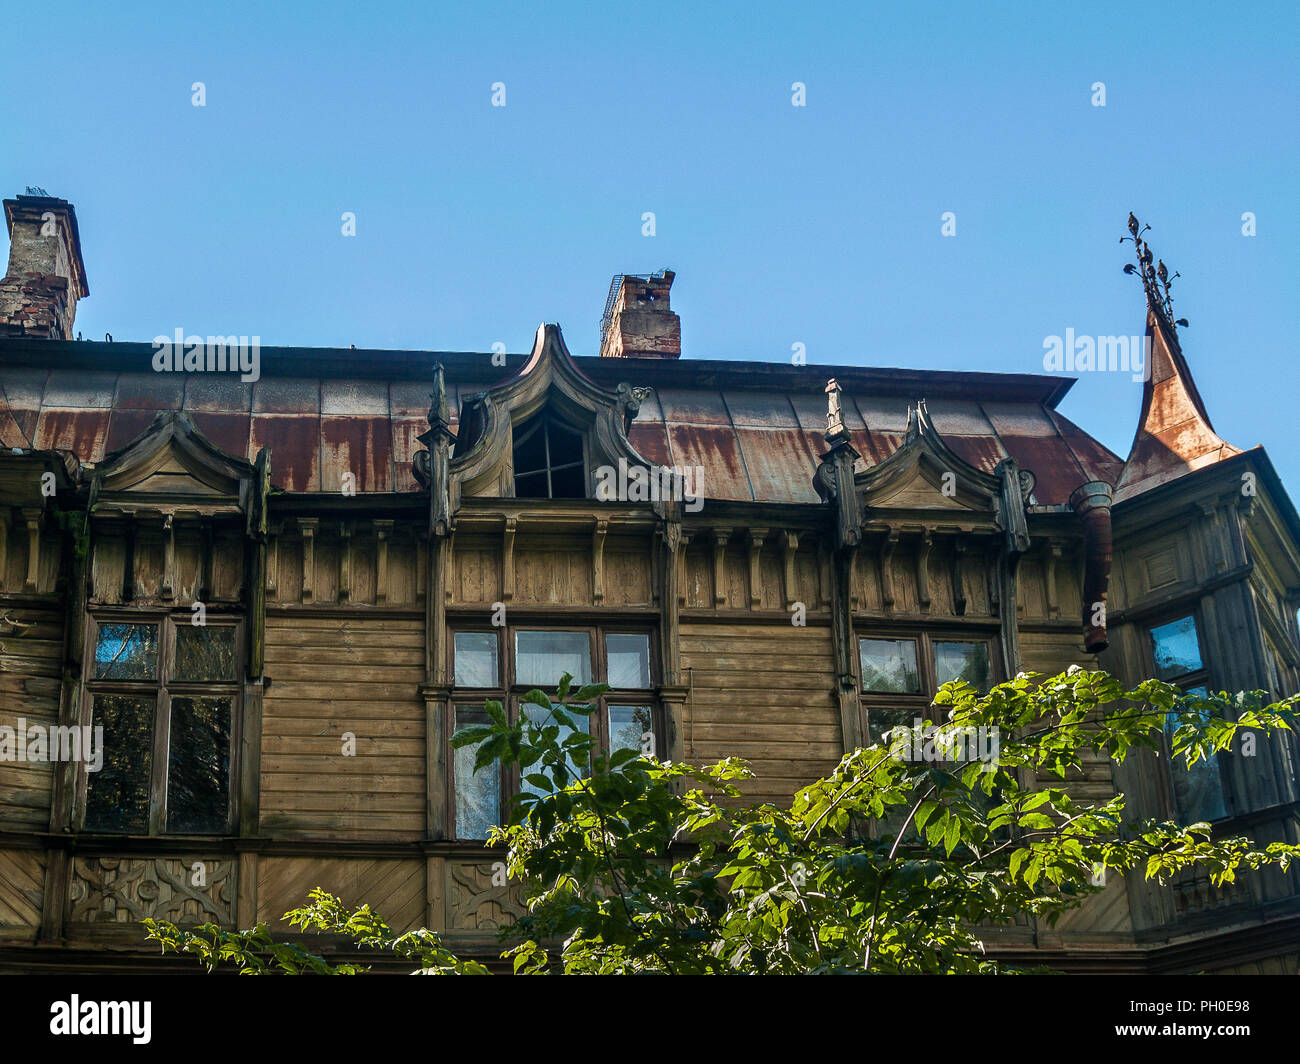 The facade of the wooden house in eclectic style with a bay window, carved attic windows, figured platbands, with a galvanized rusty roof on a clear s Stock Photo